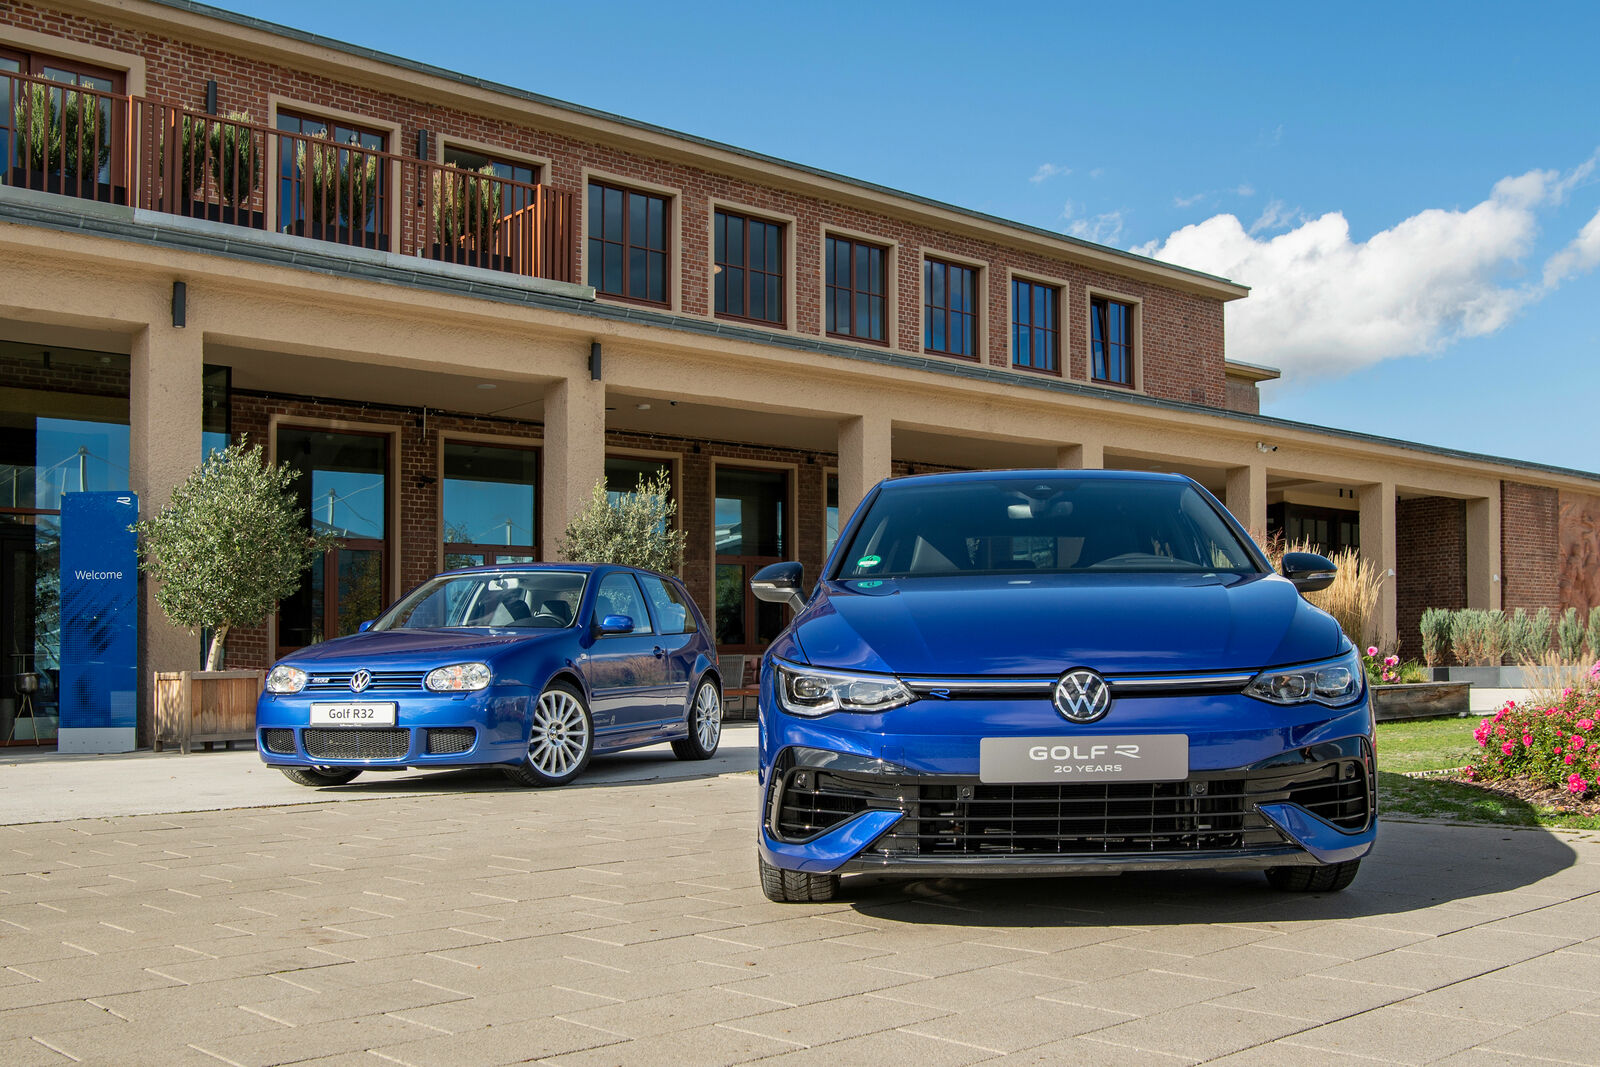 Volkswagen Golf R „20 Years“ and Golf R32